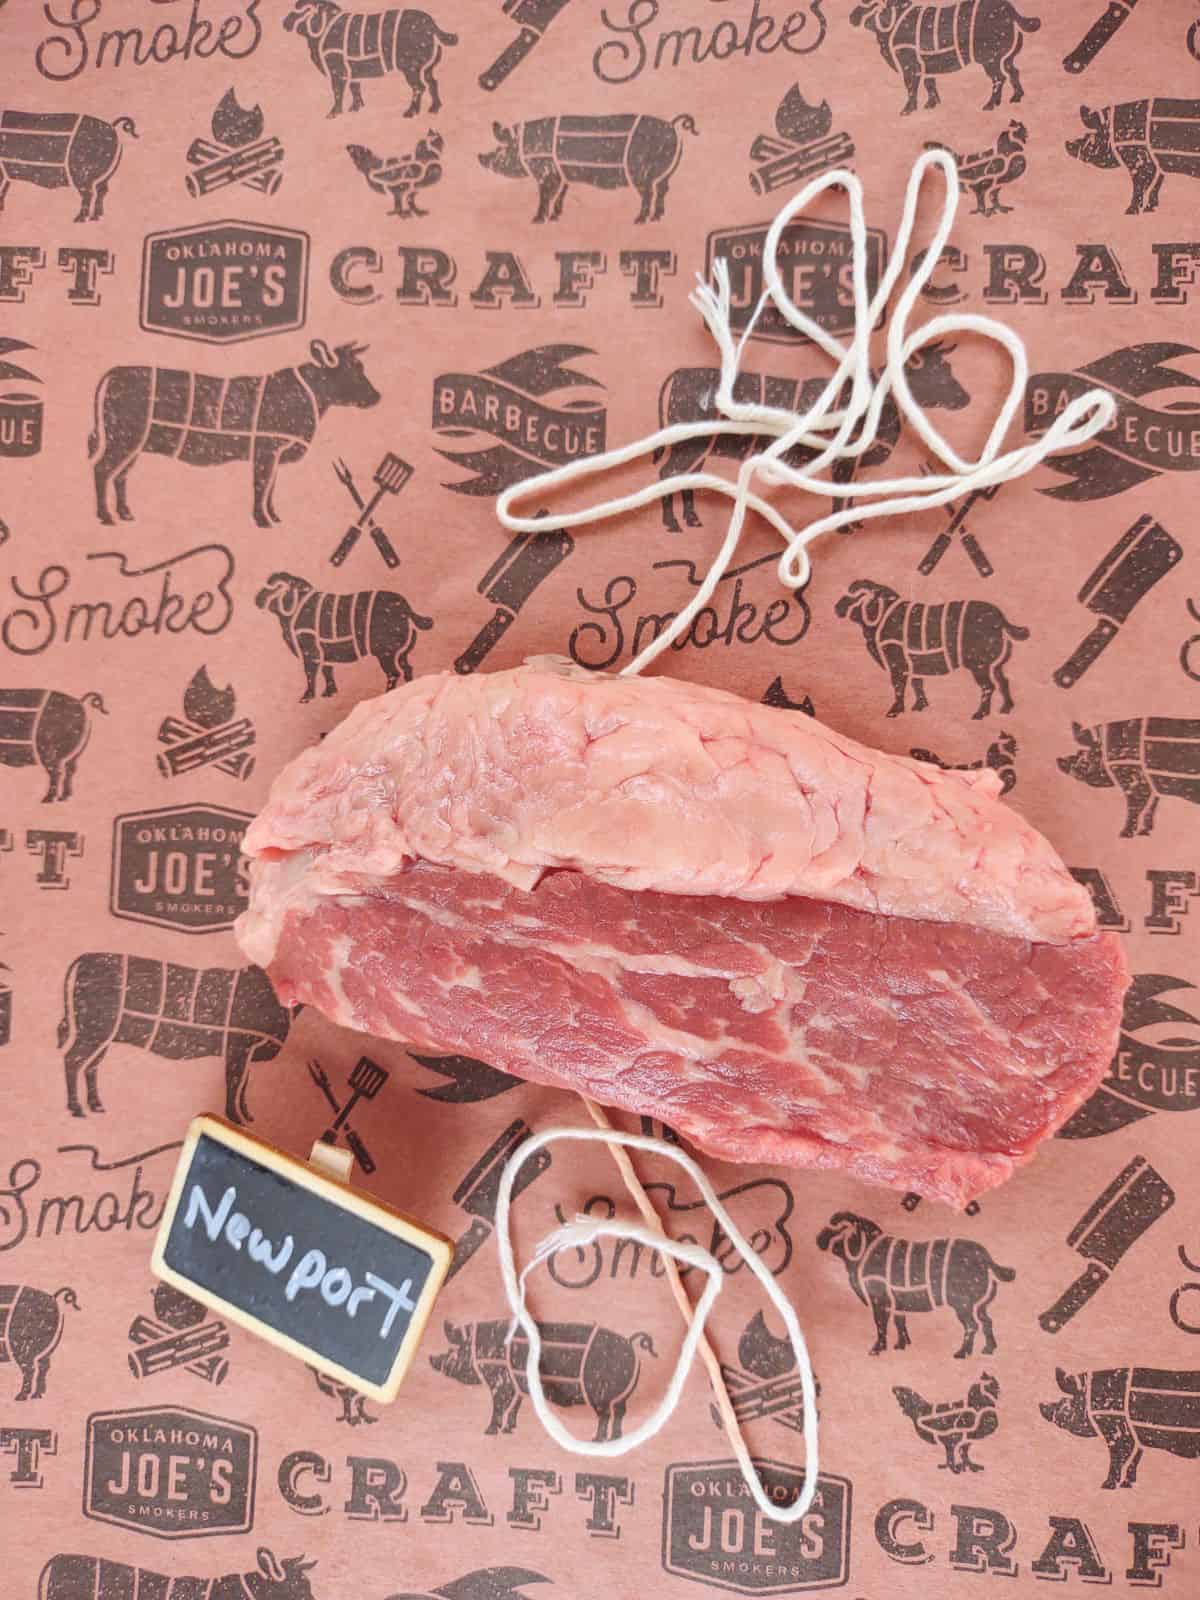 A raw Newport steak on a piece of butcher paper with string underneath the steak. A small chalkboard sign next to it reads Newport.